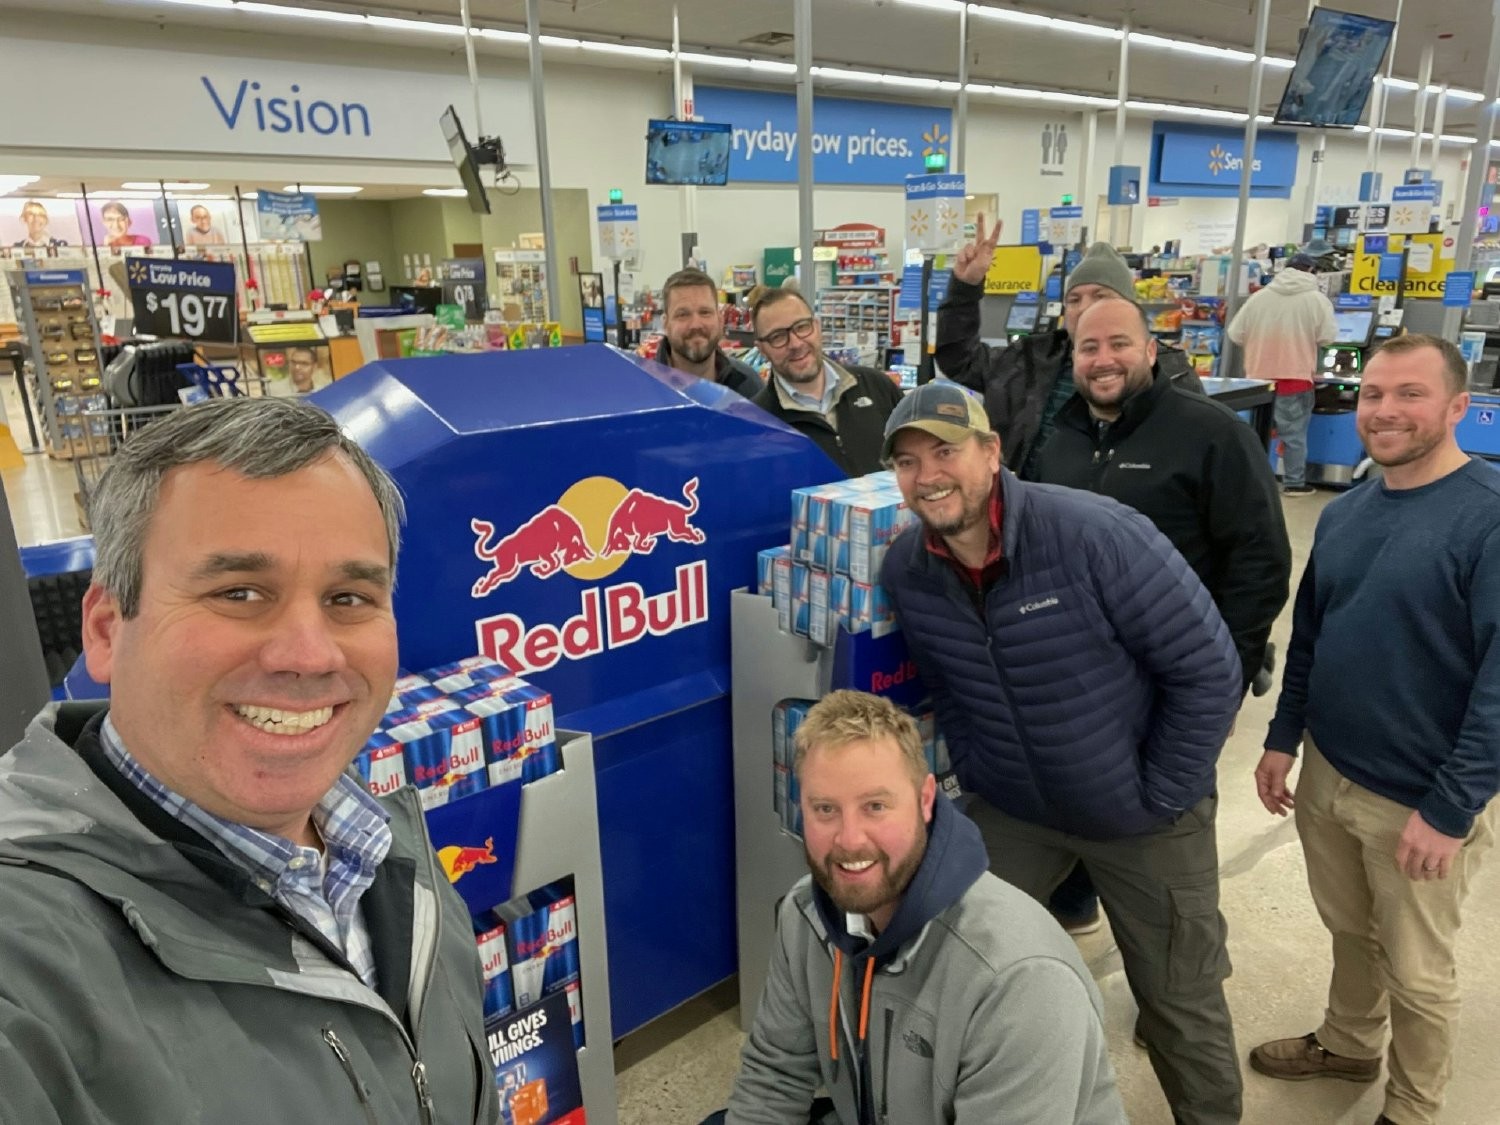 Bringing Red Bull to life at retail with customer experiences